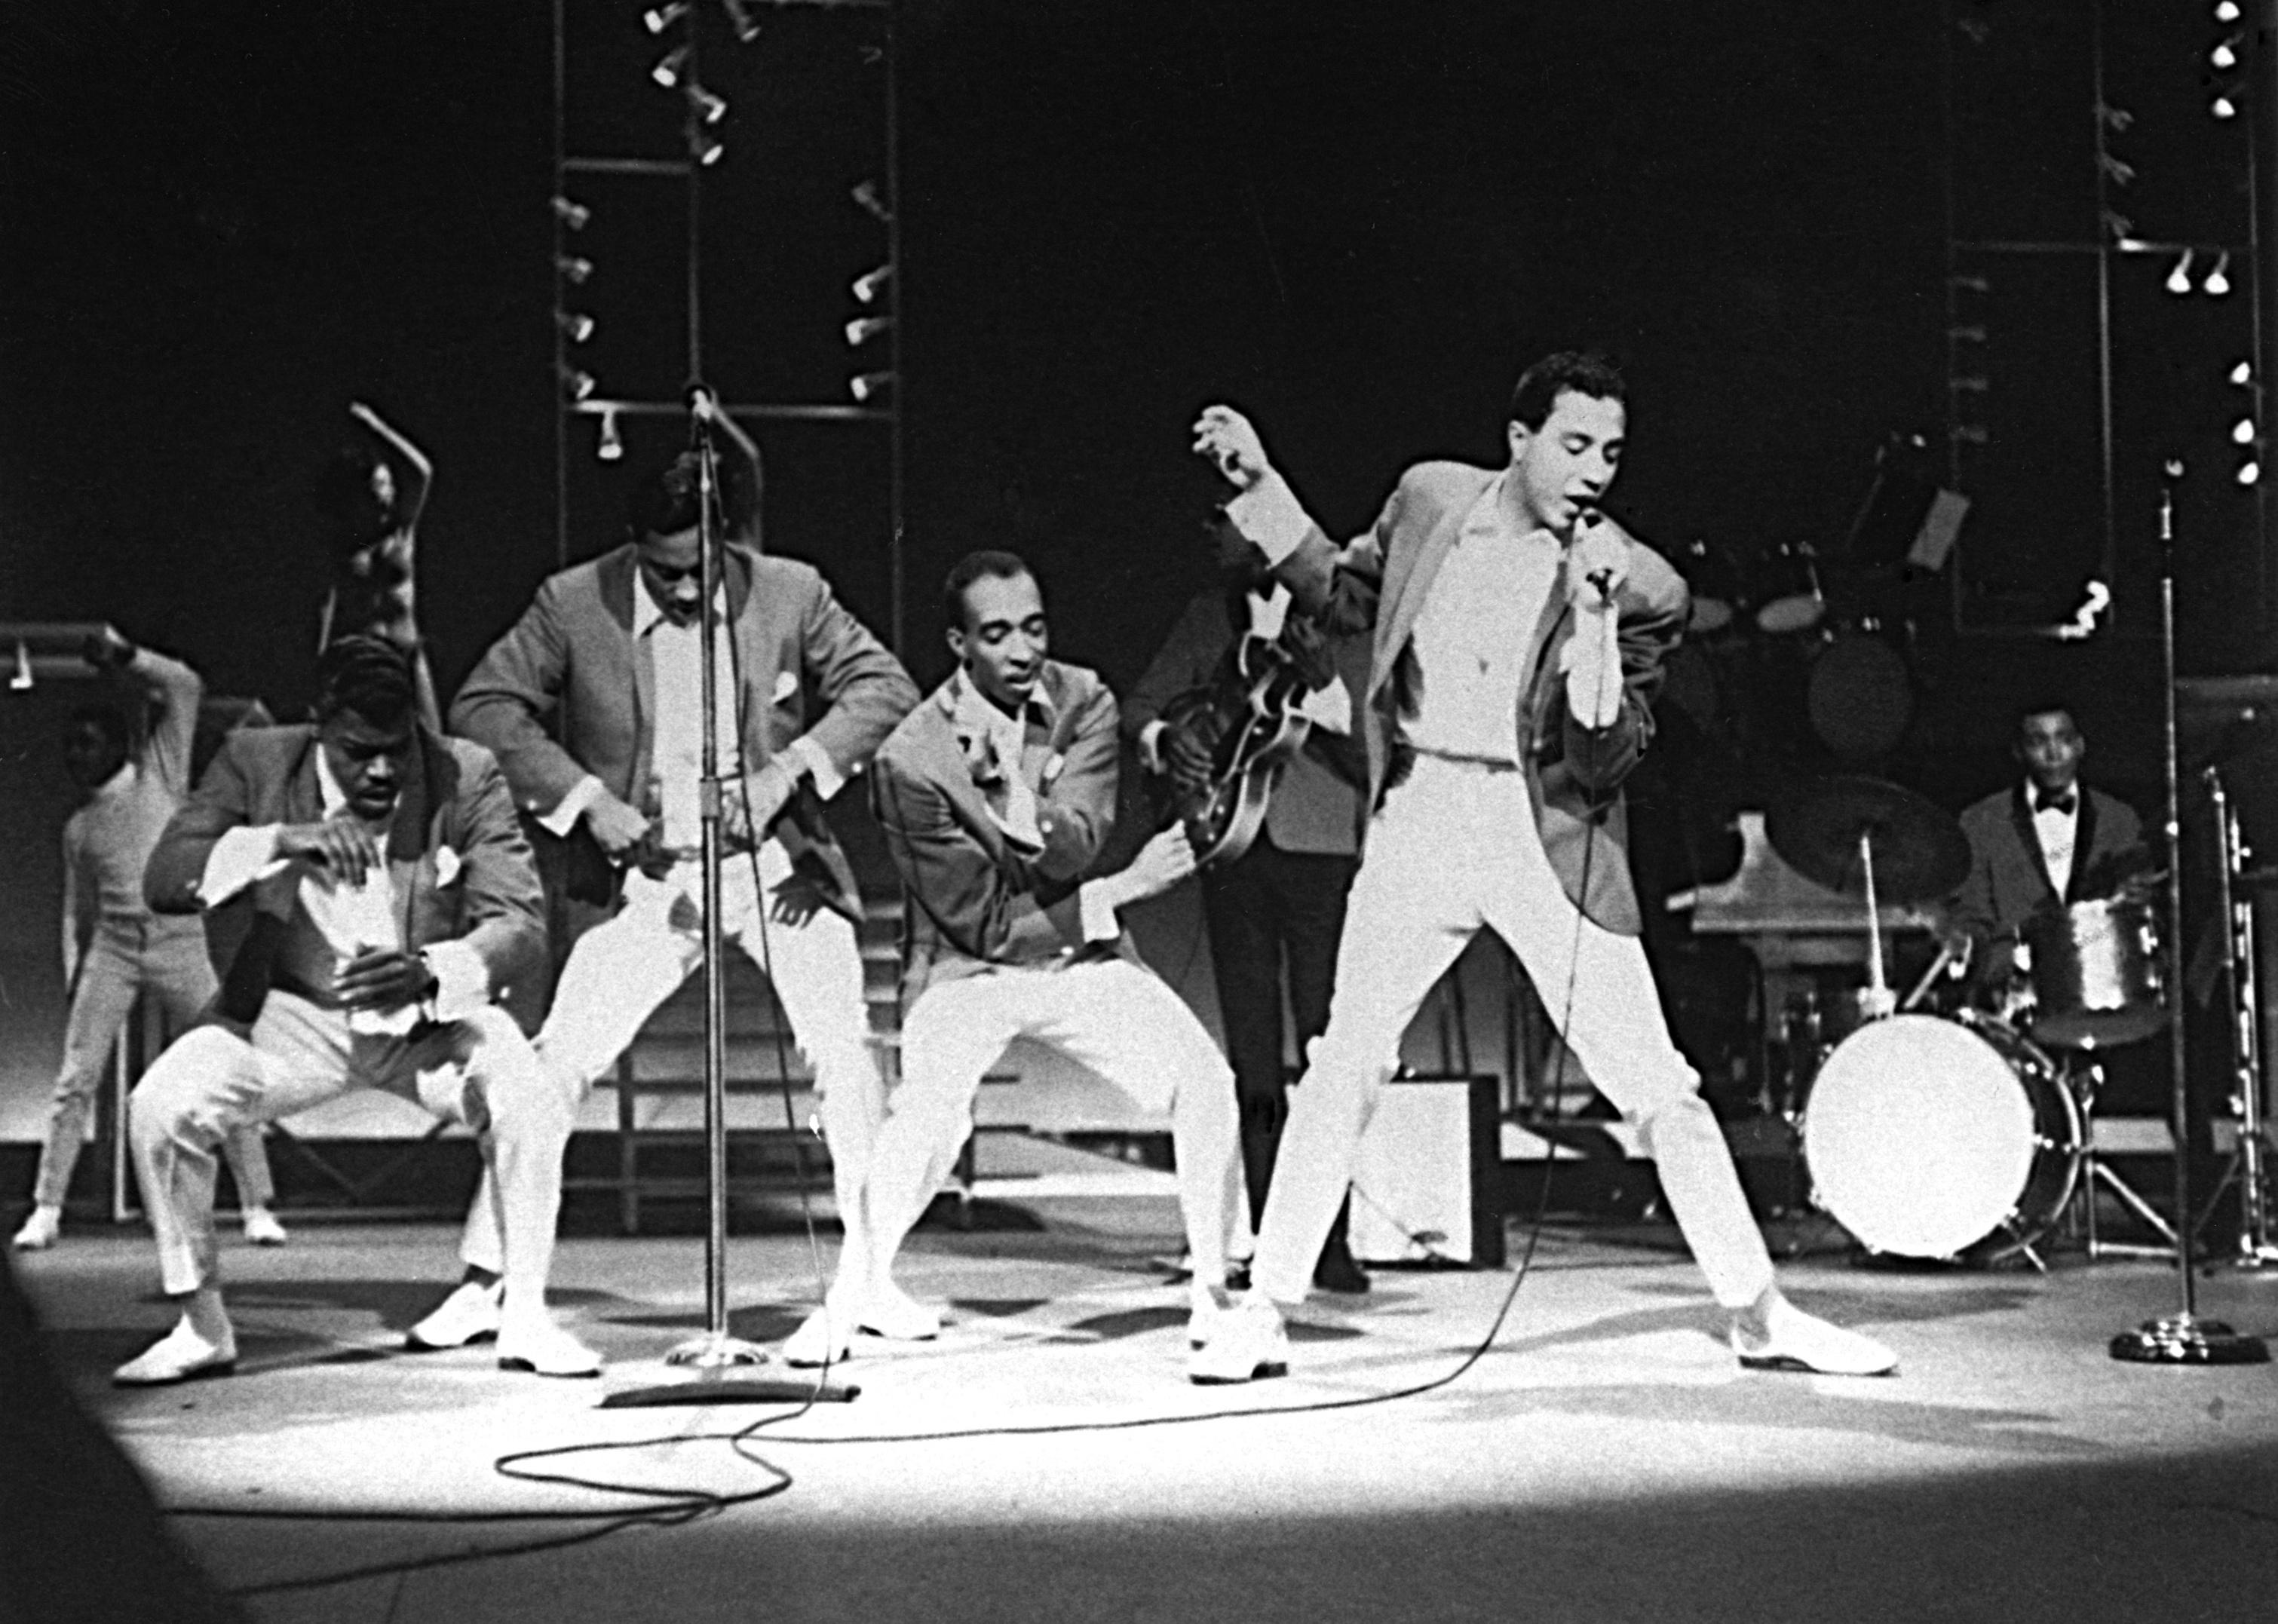 Smokey Robinson and the Miracles Gaye perform onstage during the concert movie "The T.A.M.I. Show".